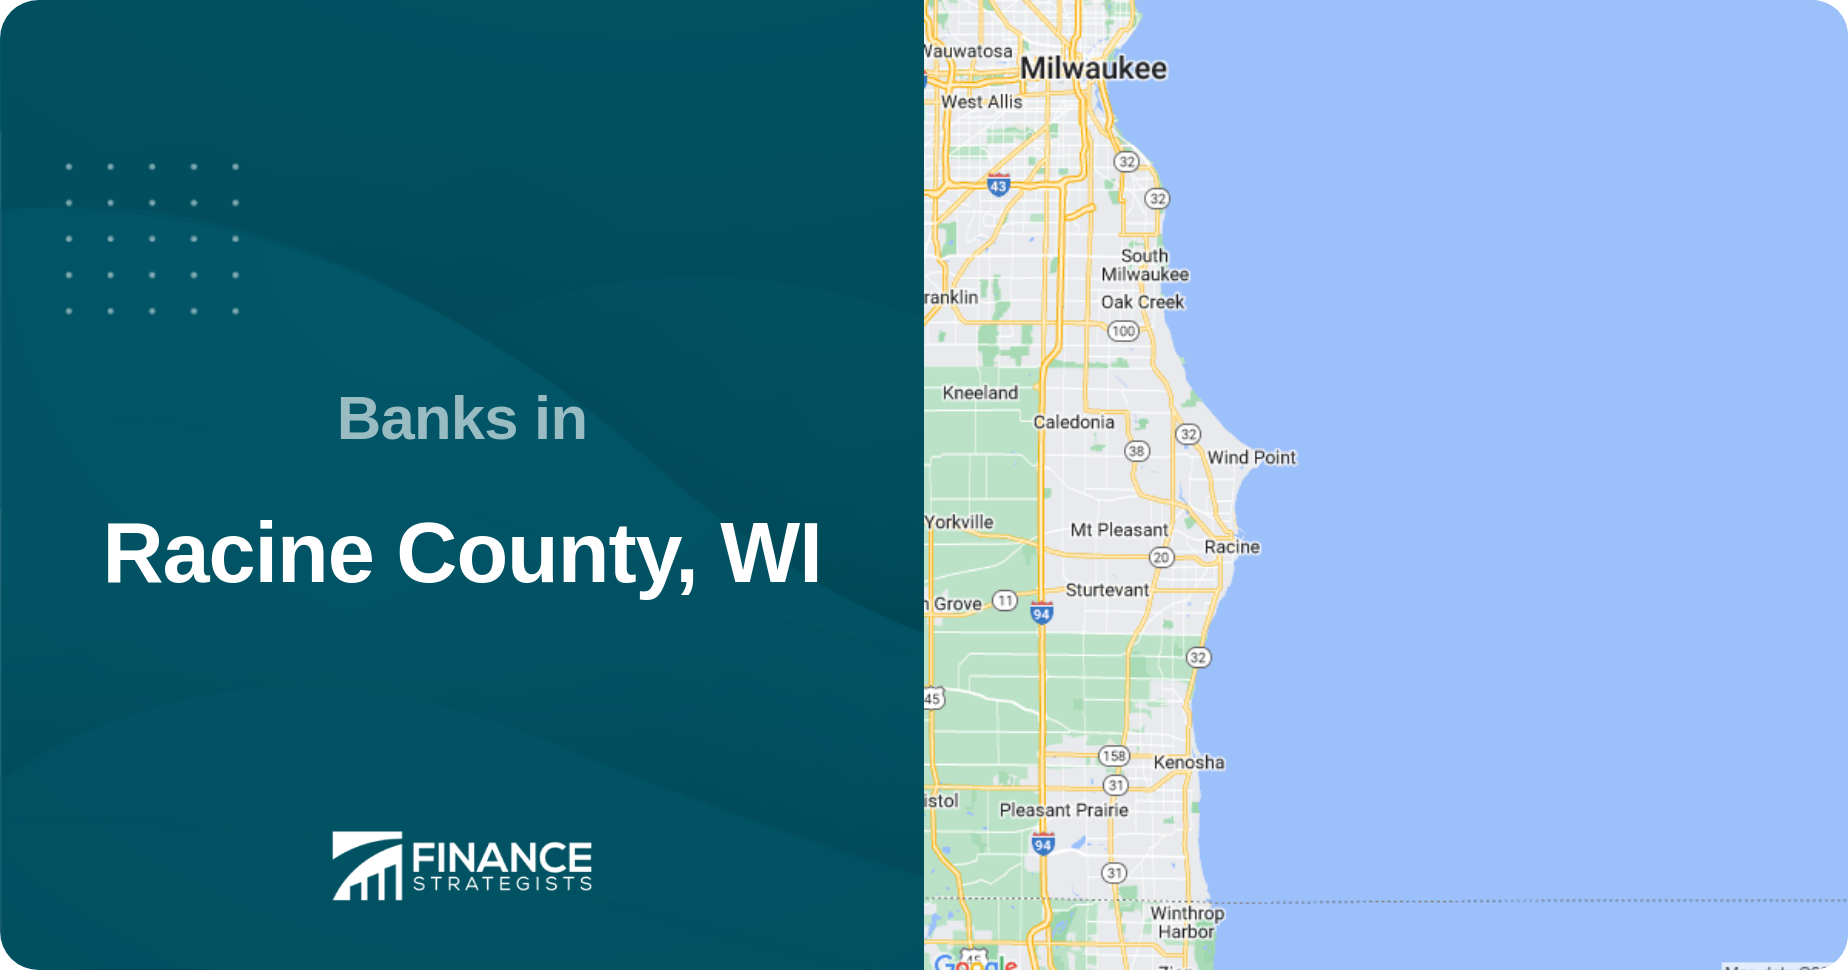 Banks in Racine County, WI